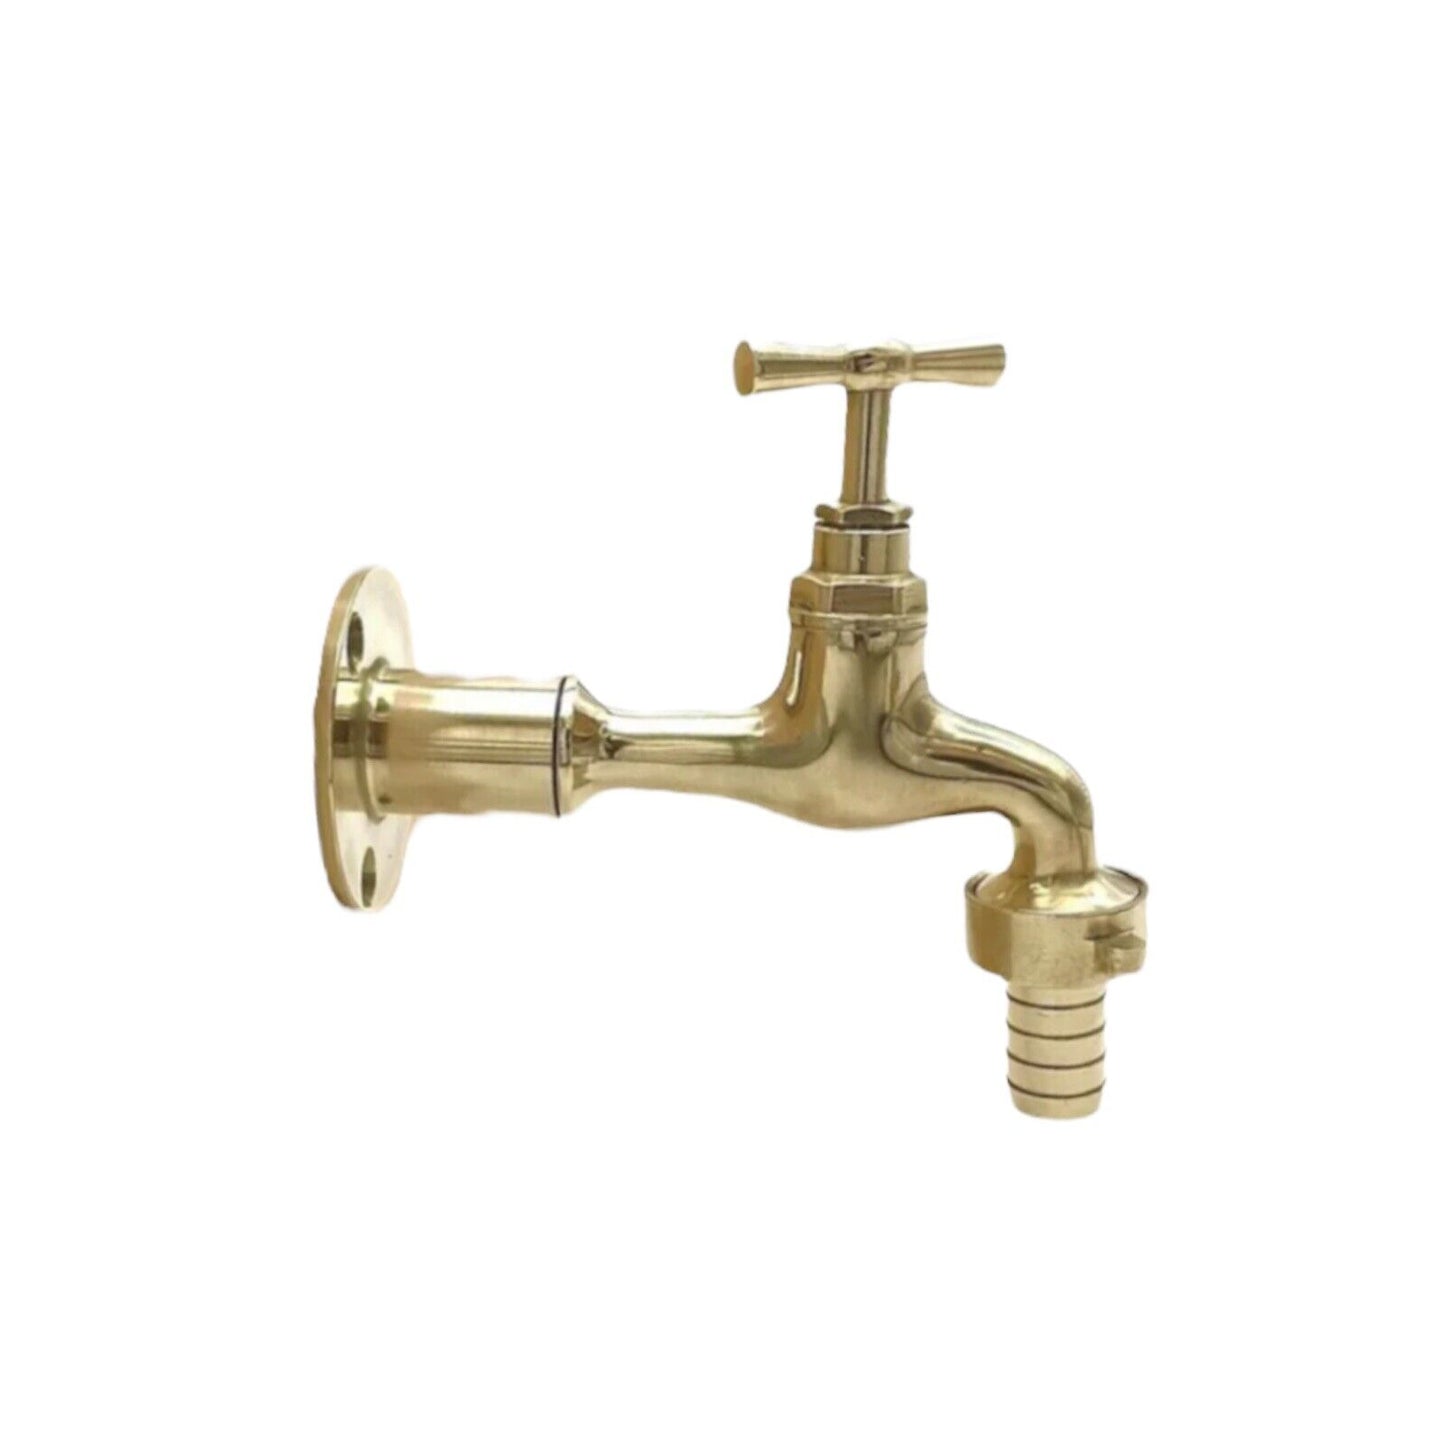 Brass wall mounted kitchen tap sold by All Things French Store